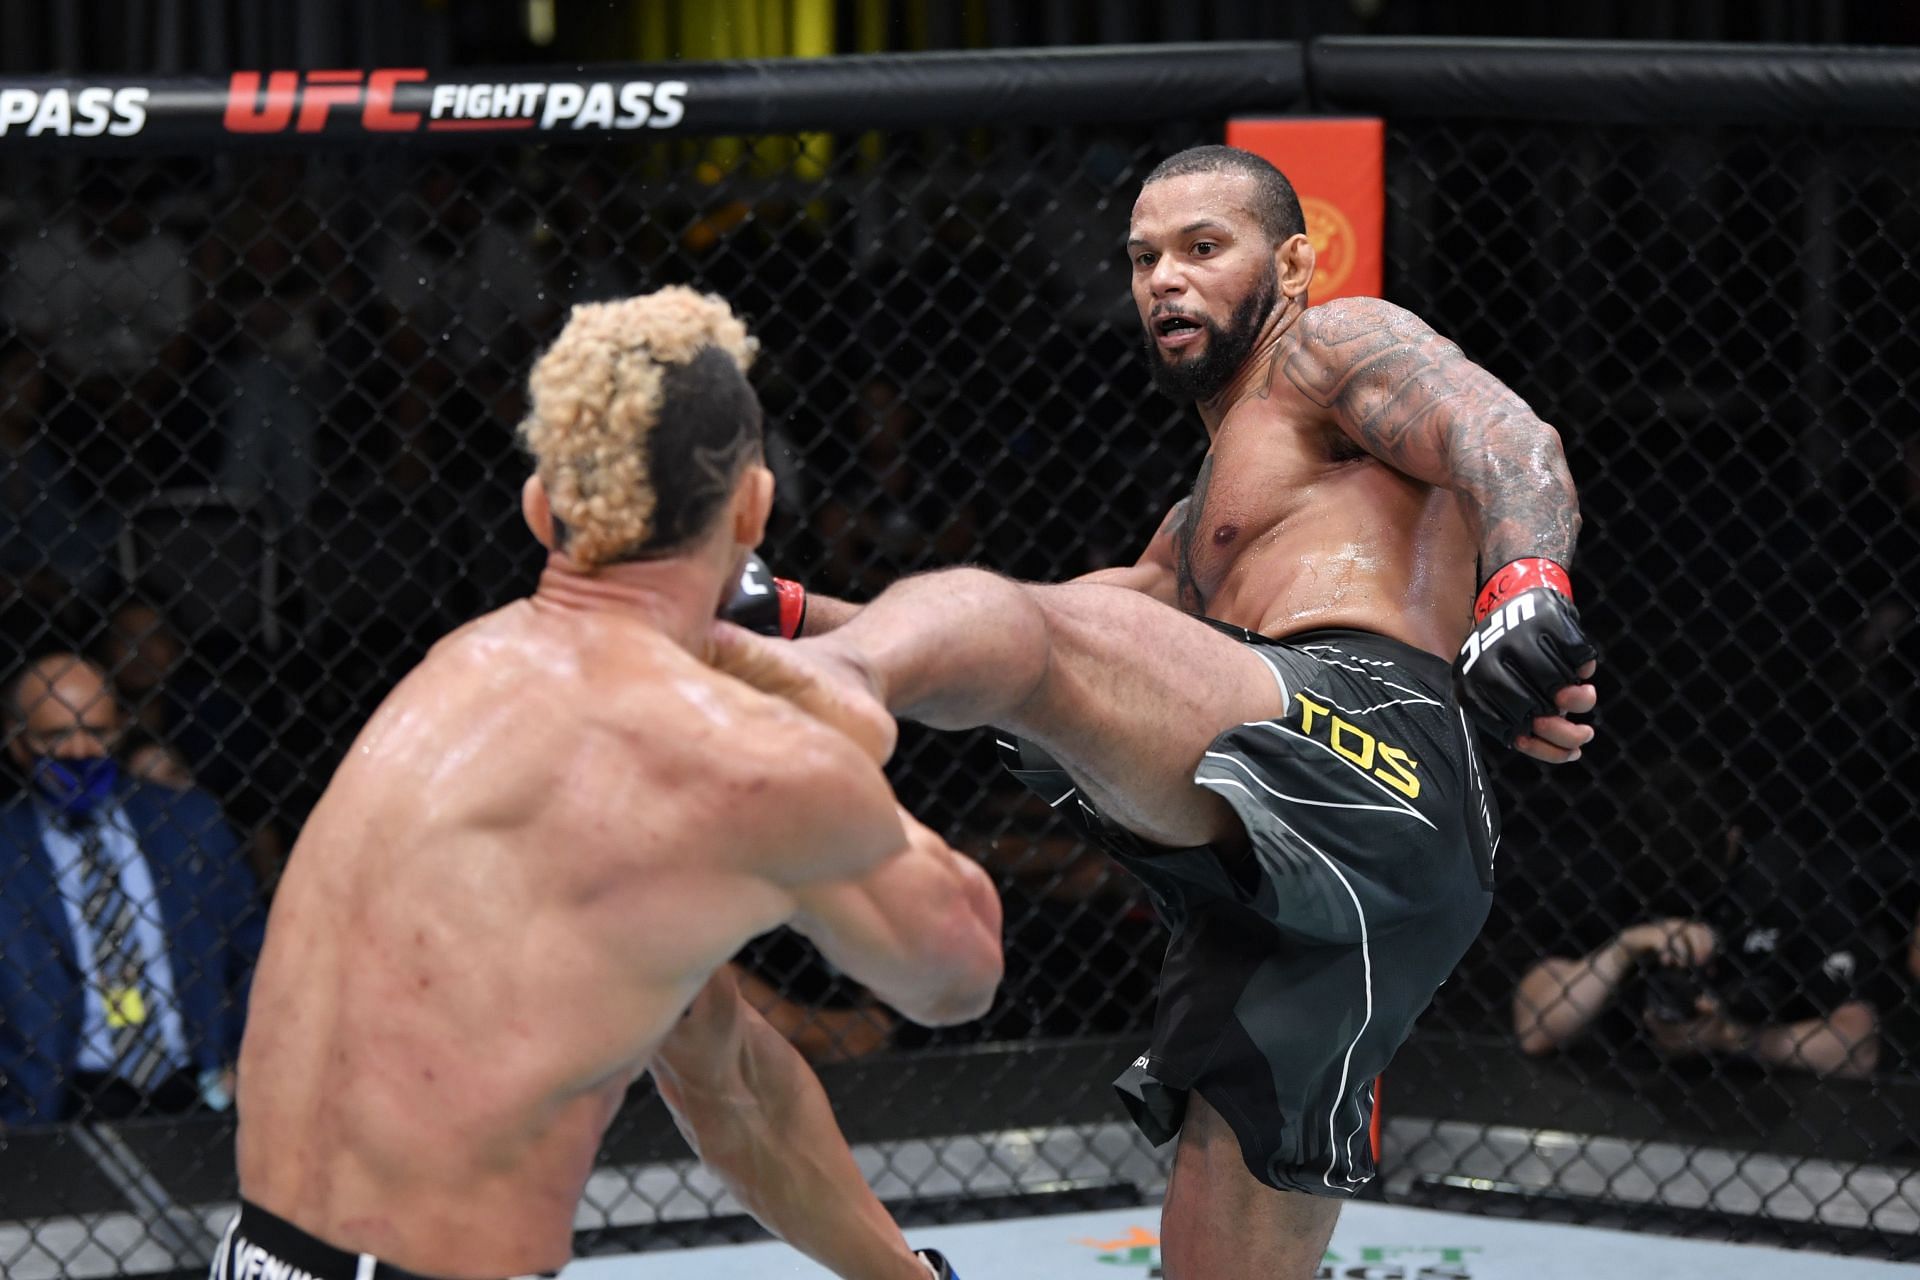 Thiago Santos has found success in the octagon after moving up in weight substantially